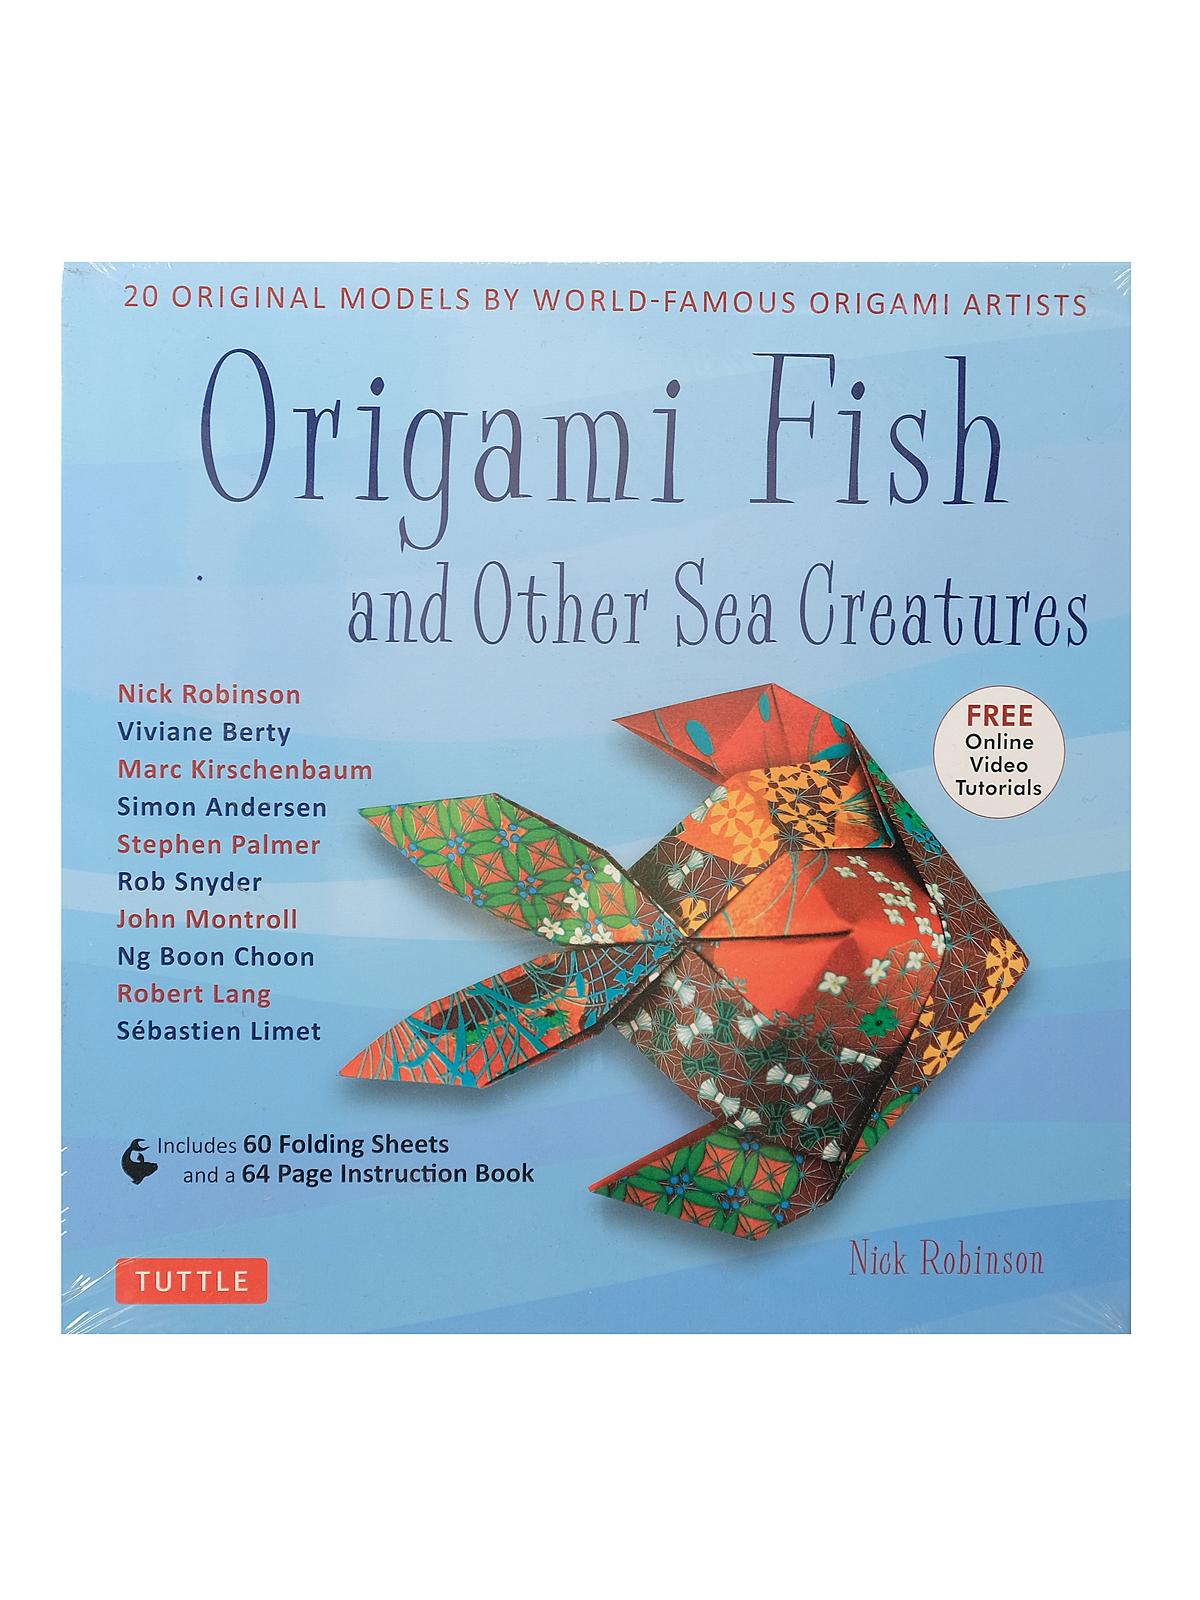 Origami Fish & Other Sea Creatures Kit each